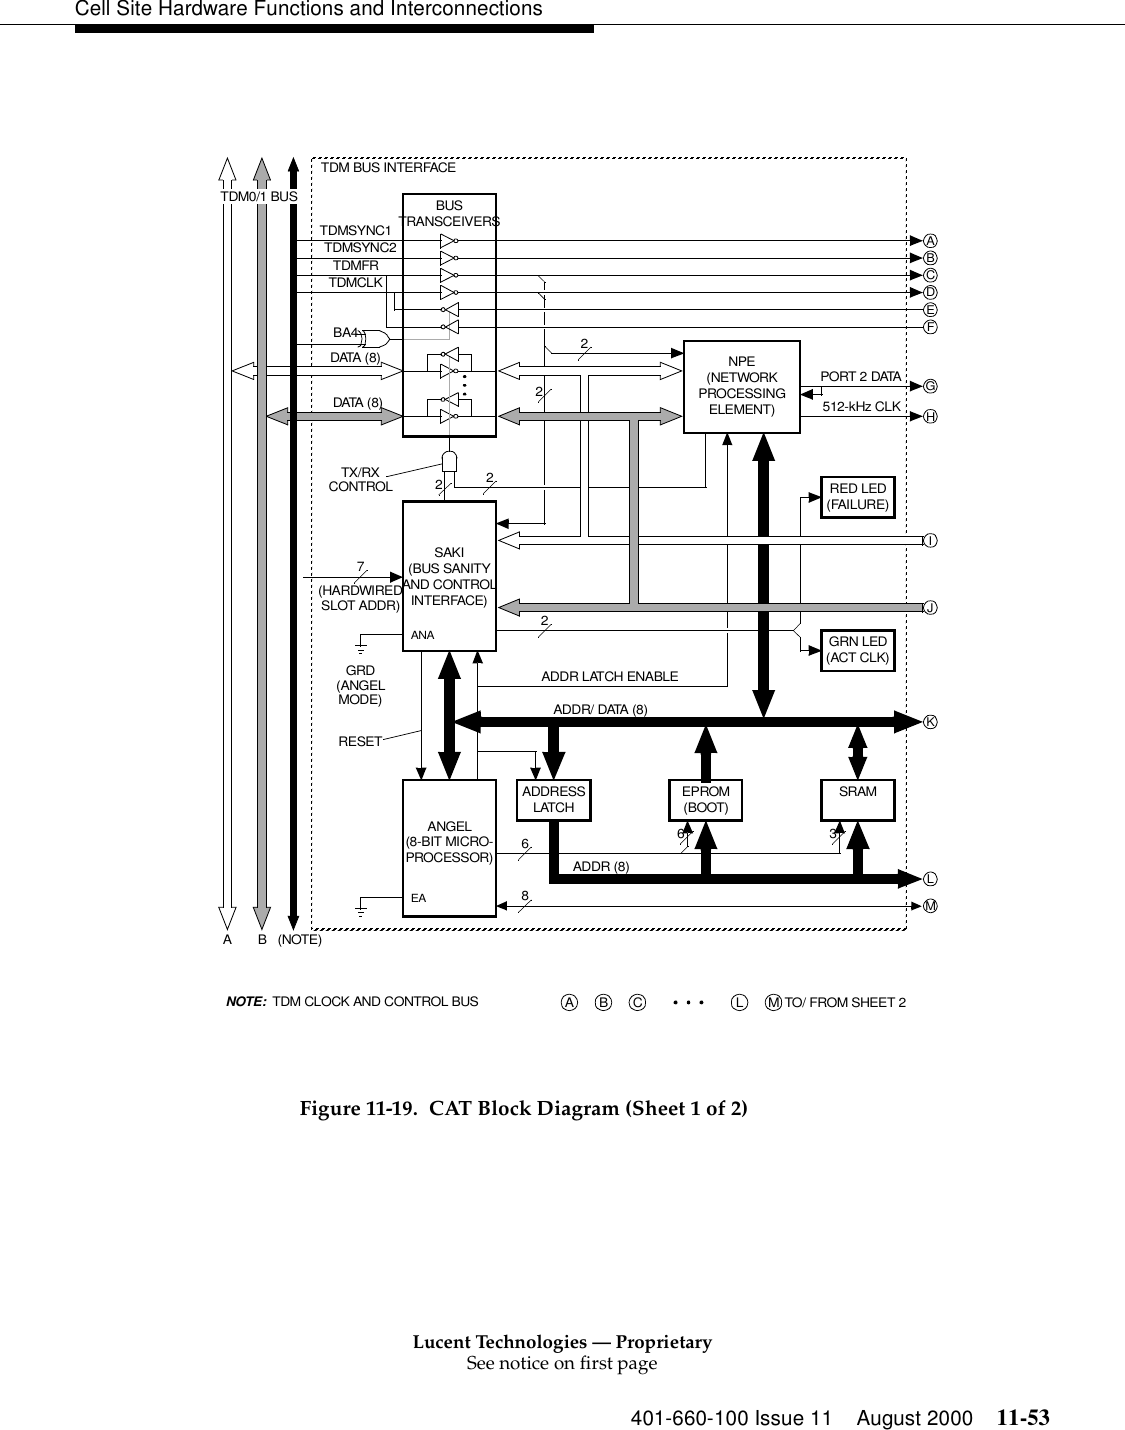 Lucent Technologies — ProprietarySee notice on first page401-660-100 Issue 11 August 2000 11-53Cell Site Hardware Functions and InterconnectionsFigure 11-19. CAT Block Diagram (Sheet 1 of 2)(8-BIT MICRO-PROCESSOR)ANGELBUSTRANSCEIVERSSAKI(BUS SANITYAND CONTROLINTERFACE)EPROM(BOOT) SRAMADDR LATCH ENABLEEA262PORT 2 DATAADDR/ DATA (8)ADDR (8)ANANPE(NETWORKPROCESSINGELEMENT)22GRD(ANGELMODE)RESETTX/RXCONTROL(HARDWIREDSLOT ADDR)7TDM BUS INTERFACEABGRN LED(ACT CLK)RED LED(FAILURE)AL M TO/ FROM SHEET 2A B CBA4DATA (8)8DATA (8)6 3BCDEFGIJKLM(NOTE)TDMSYNC2TDMSYNC1TDMFRTDMCLKH512-kHz CLK2TDM0/1 BUSTDM CLOCK AND CONTROL BUSNOTE:ADDRESSLATCH